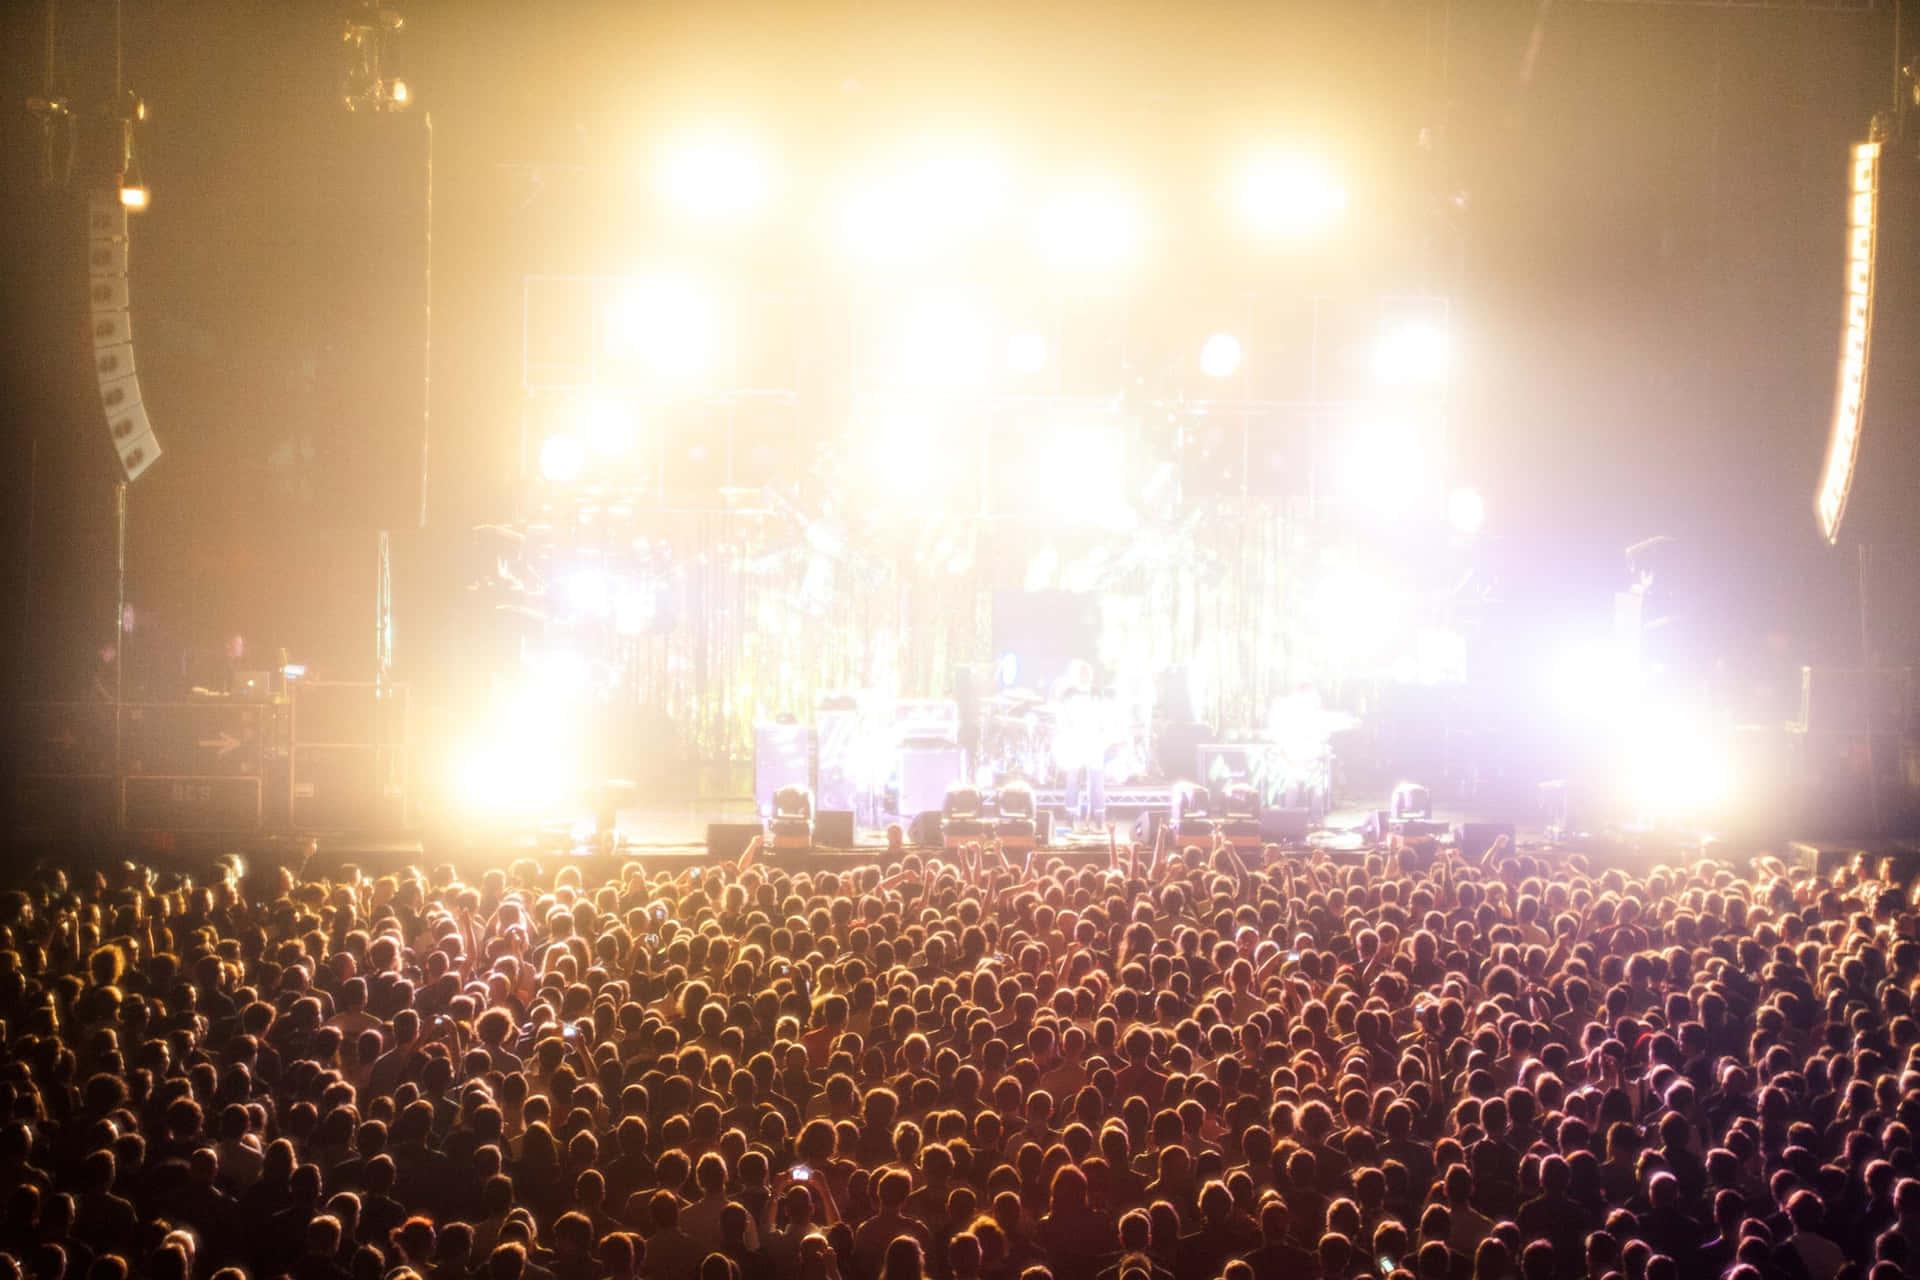 Jam Packed Concert Background With Bright Lights